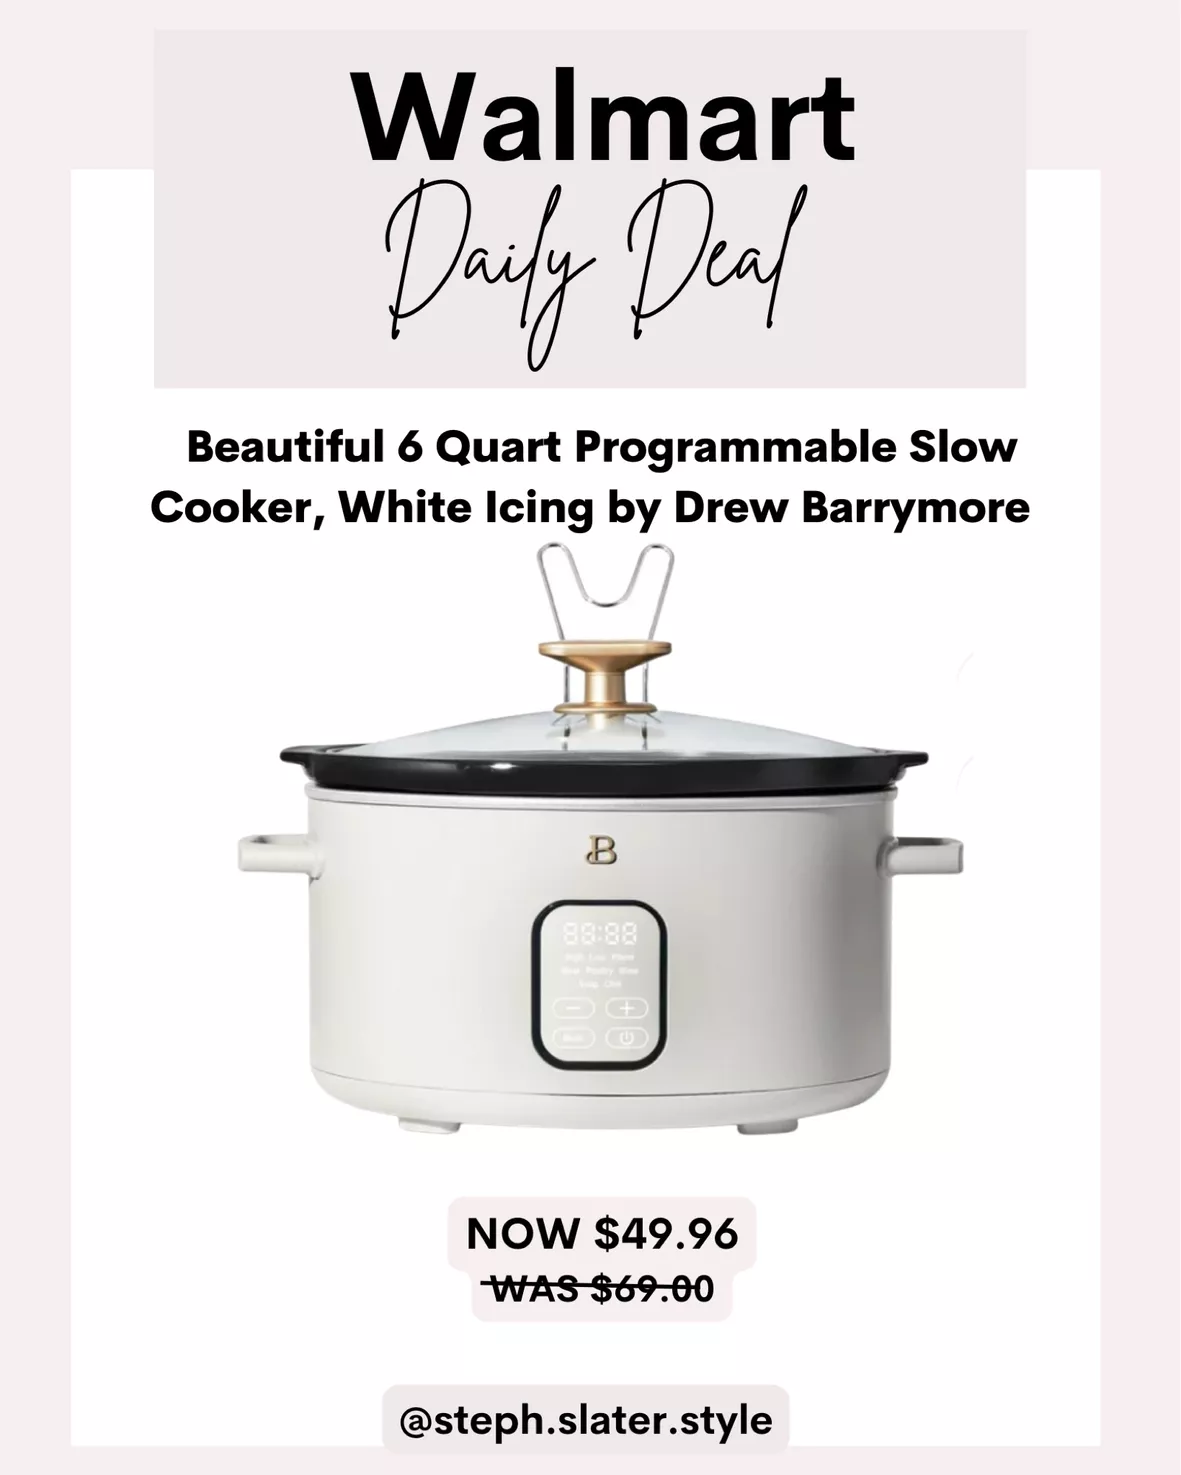 Beautiful 6 Quart Programmable Slow Cooker White Icing by Drew